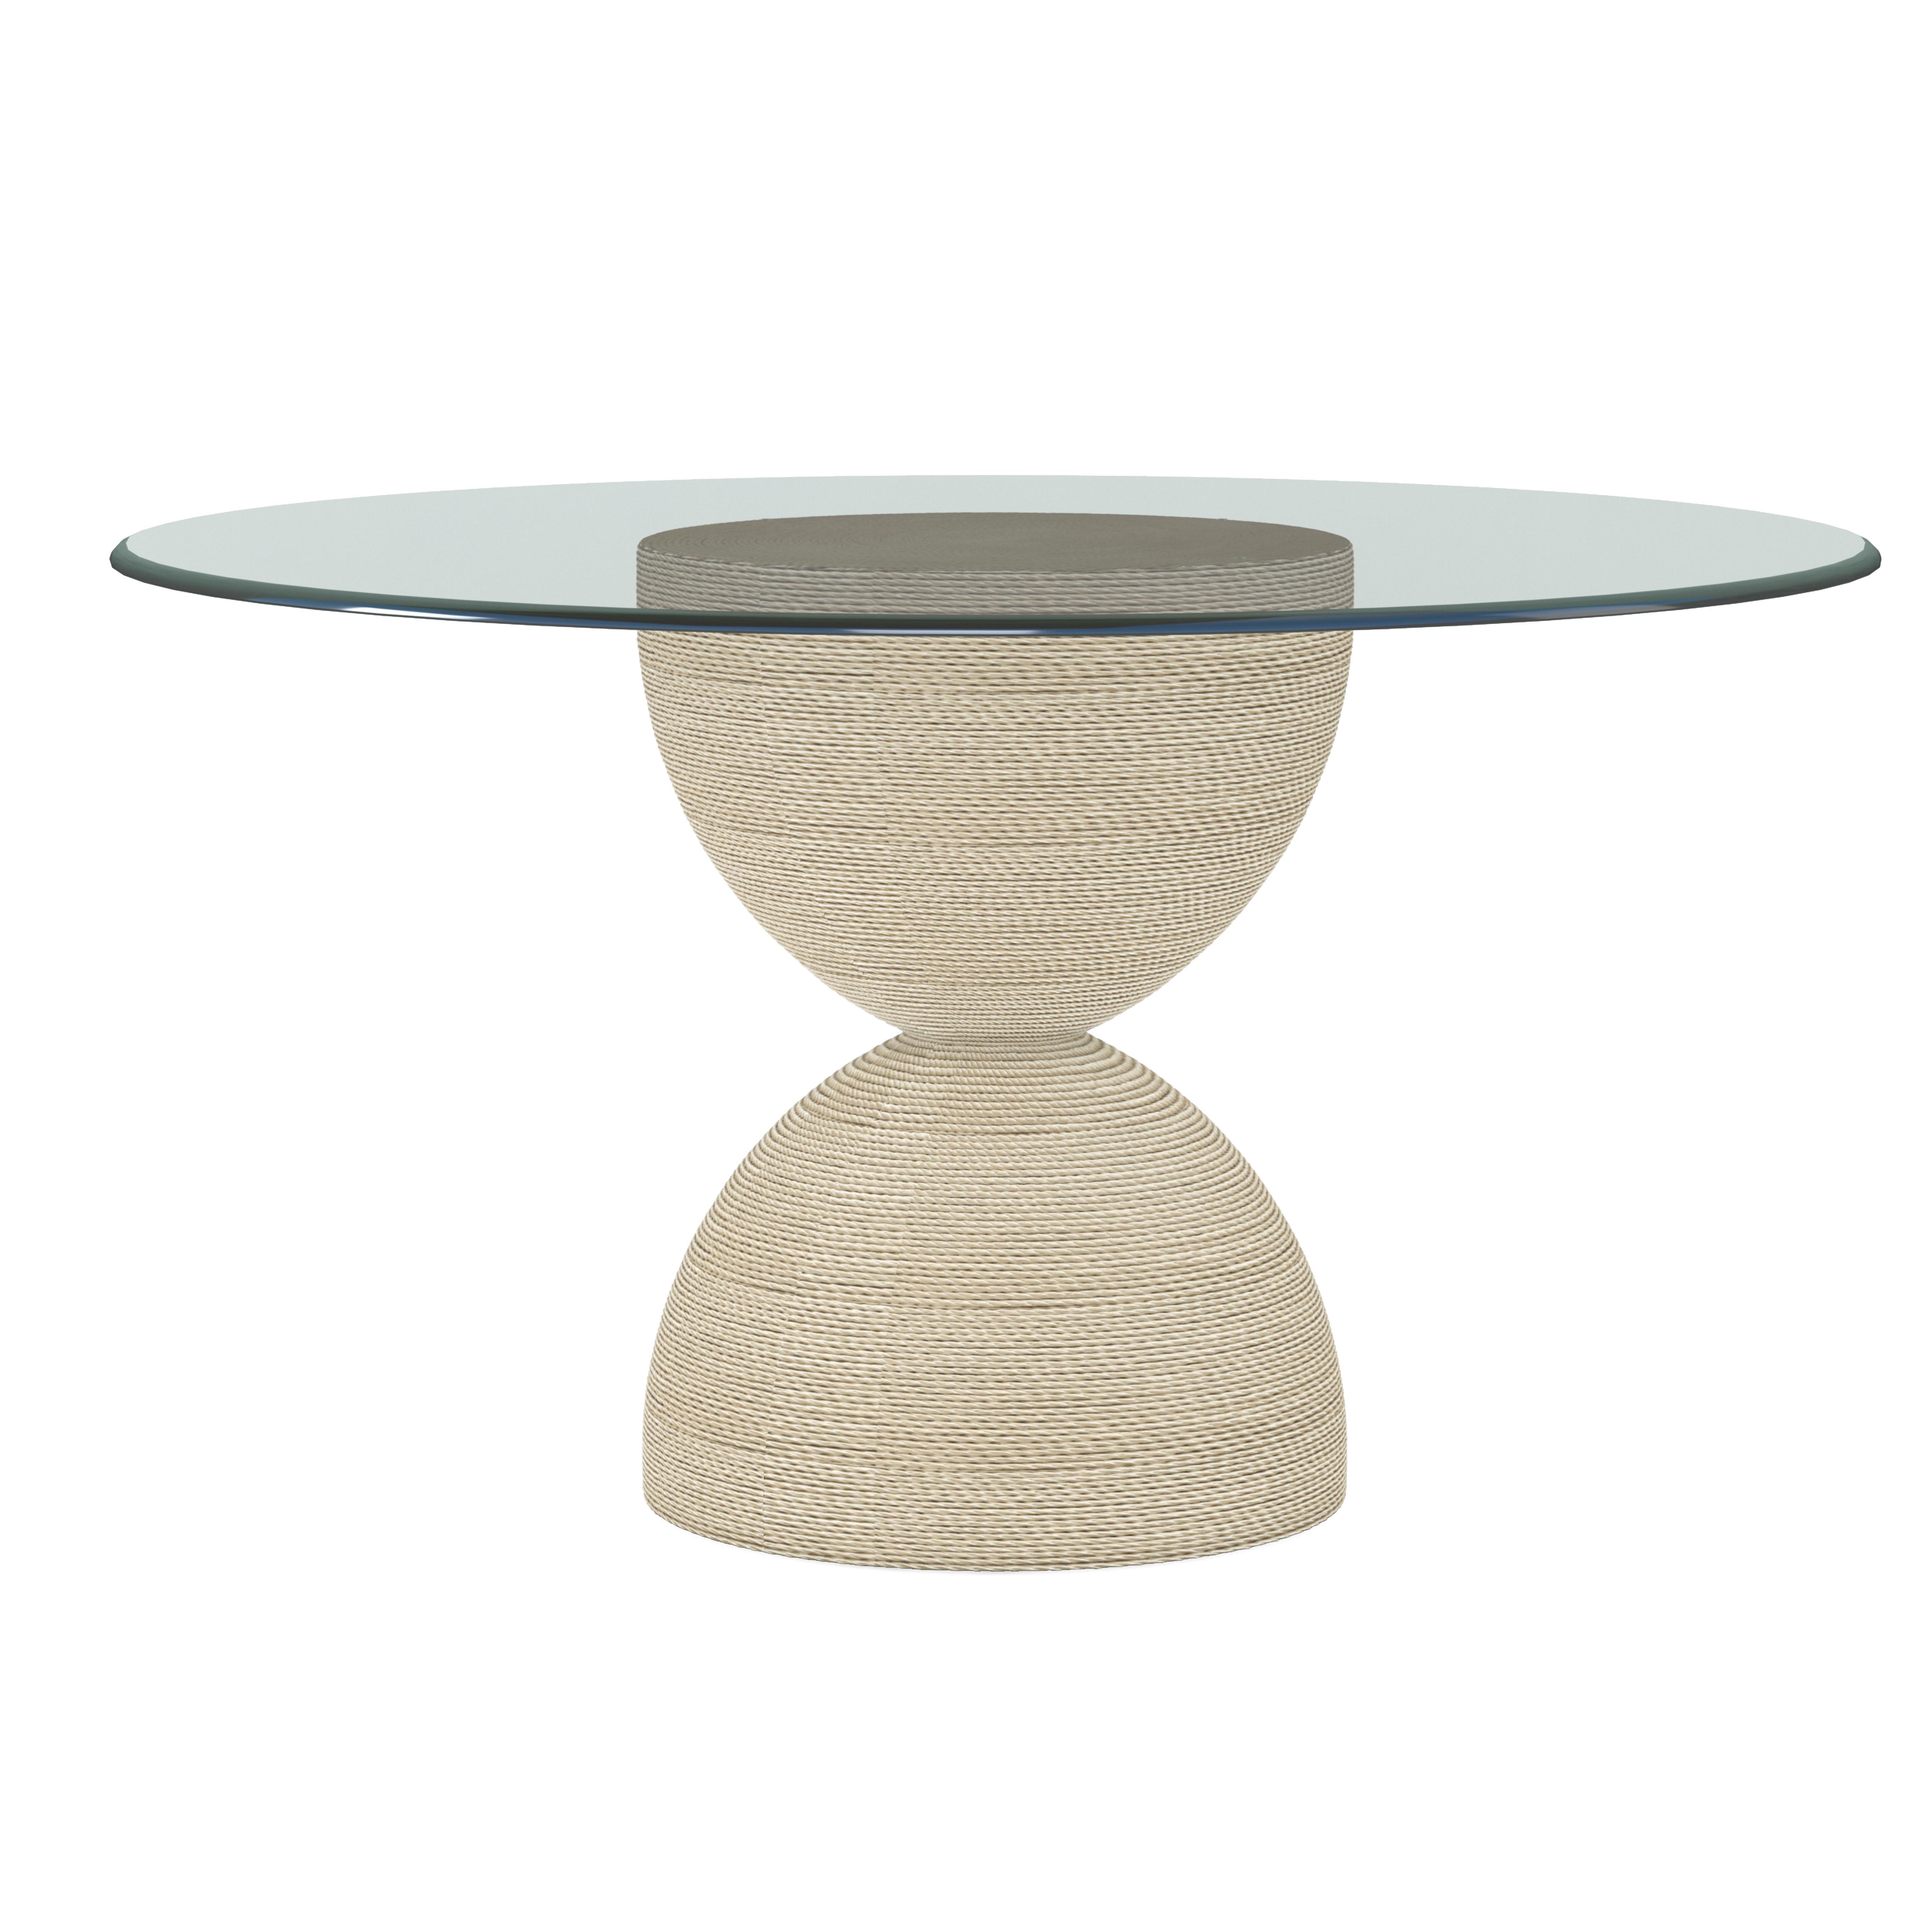 Contemporary Dining Table Cotiere 299225-000154 in Beige Linen